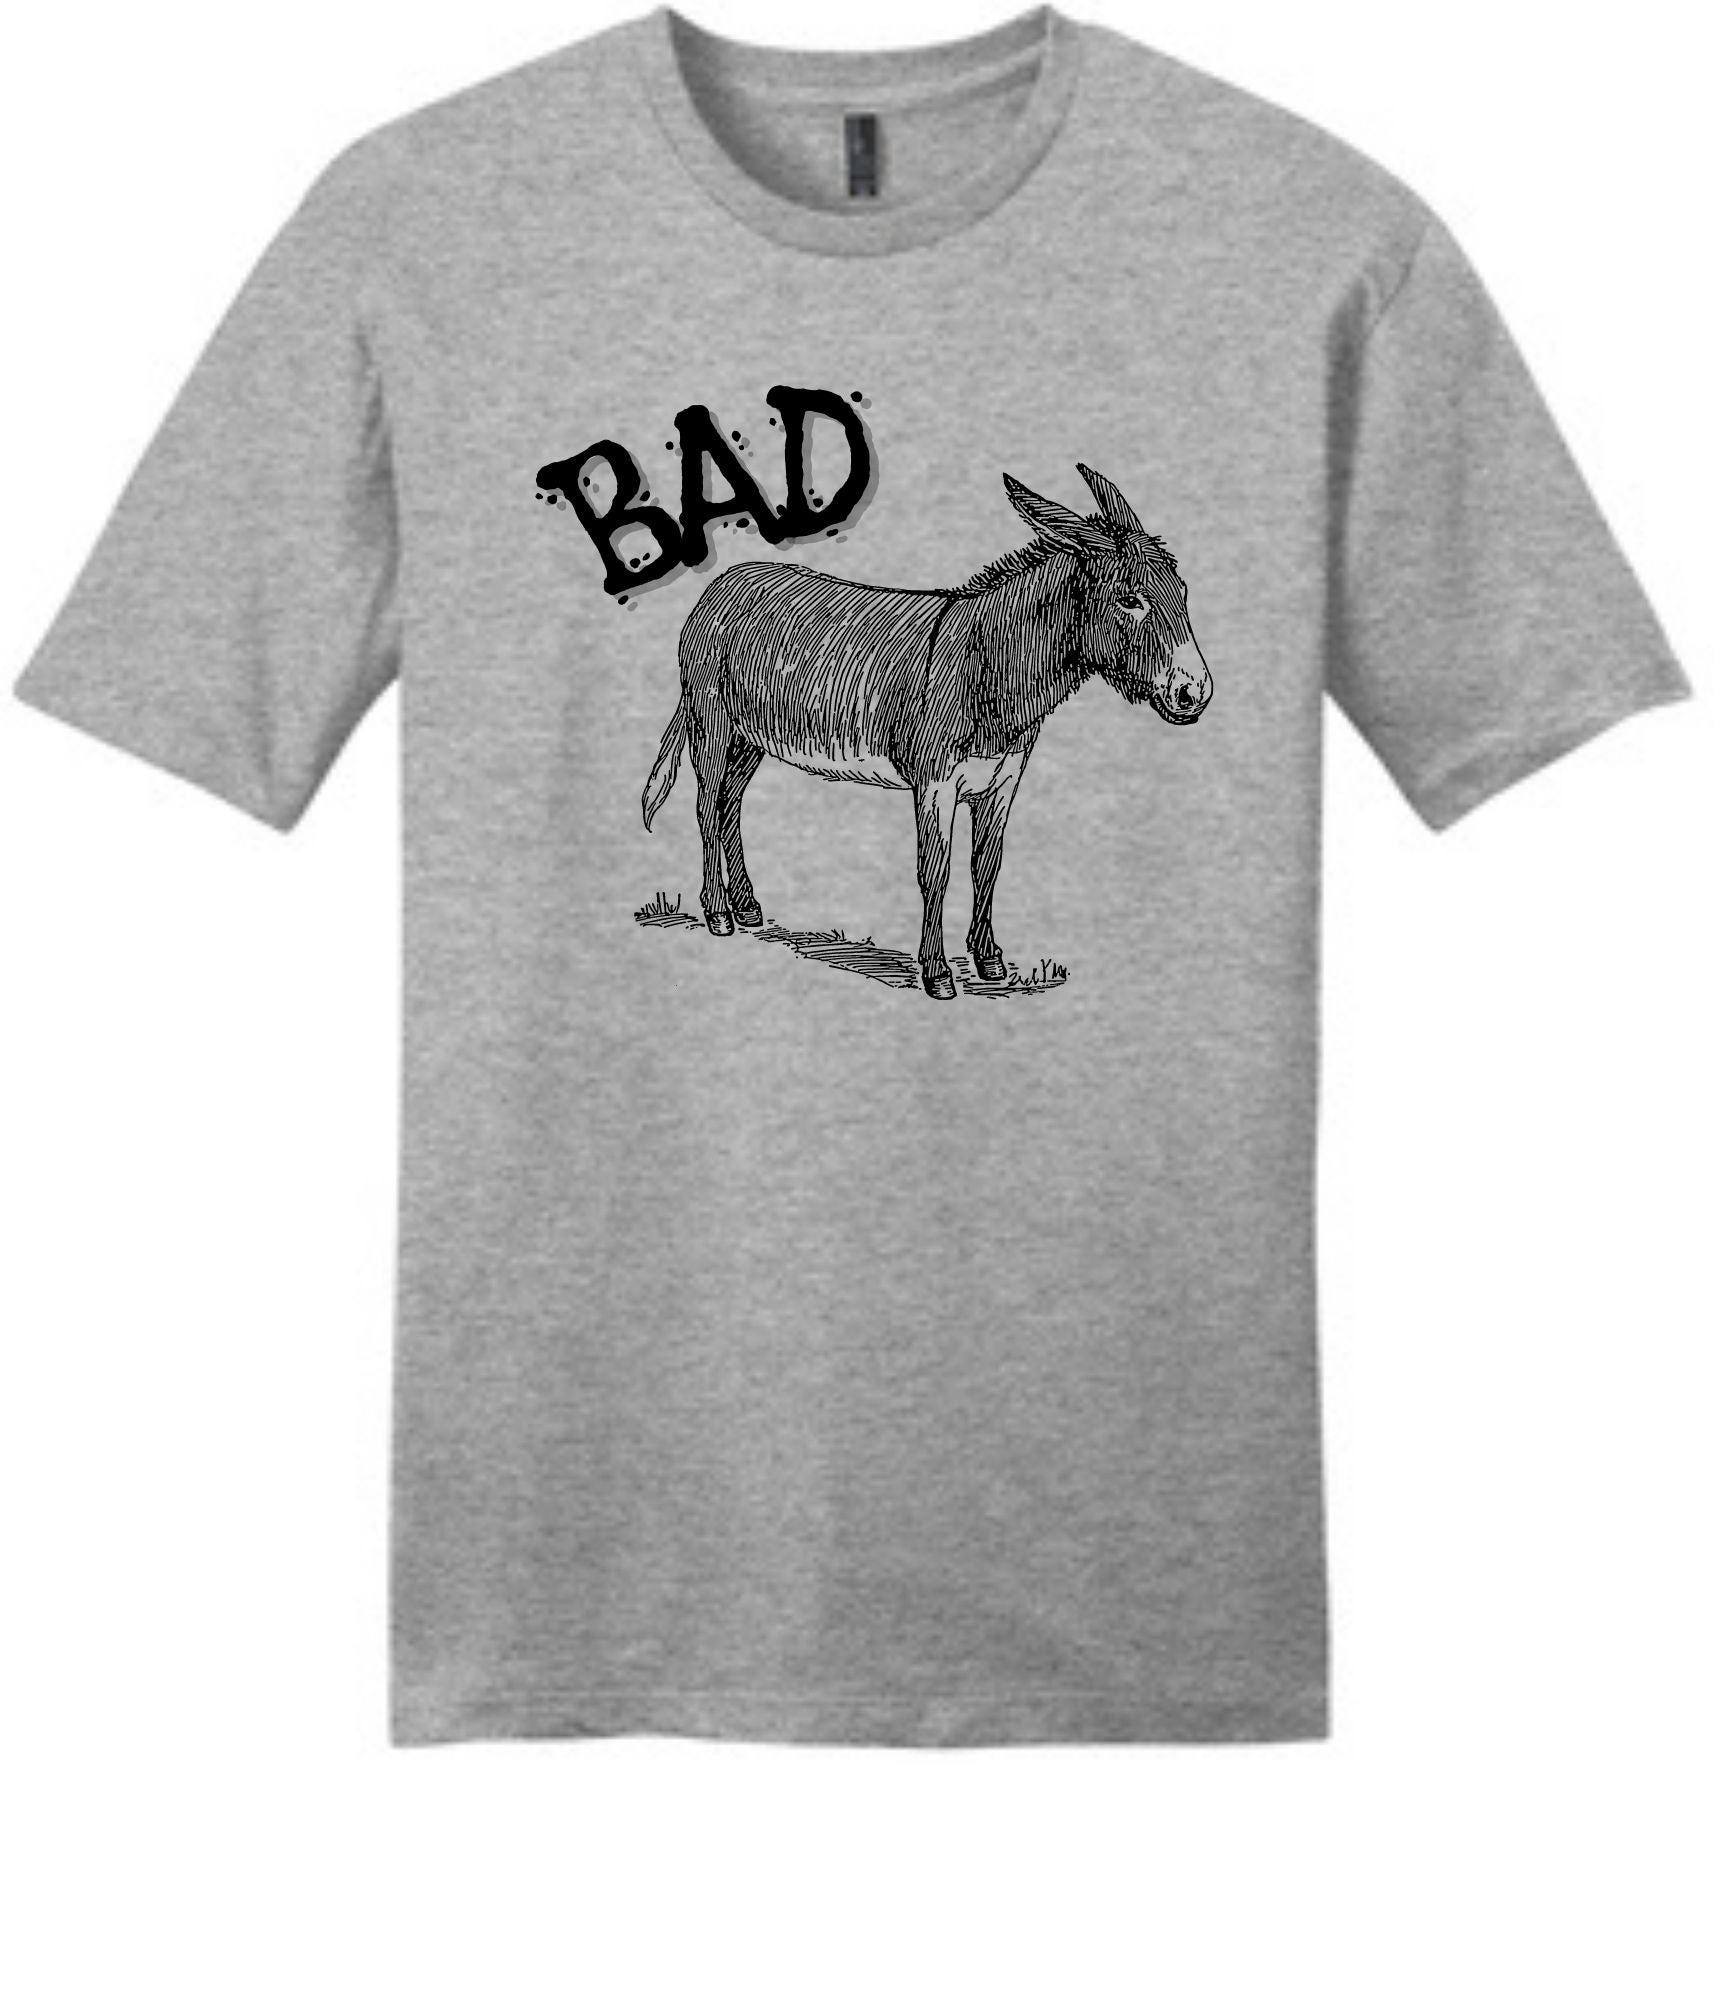 Father's Day funny bad ass cotton tshirt